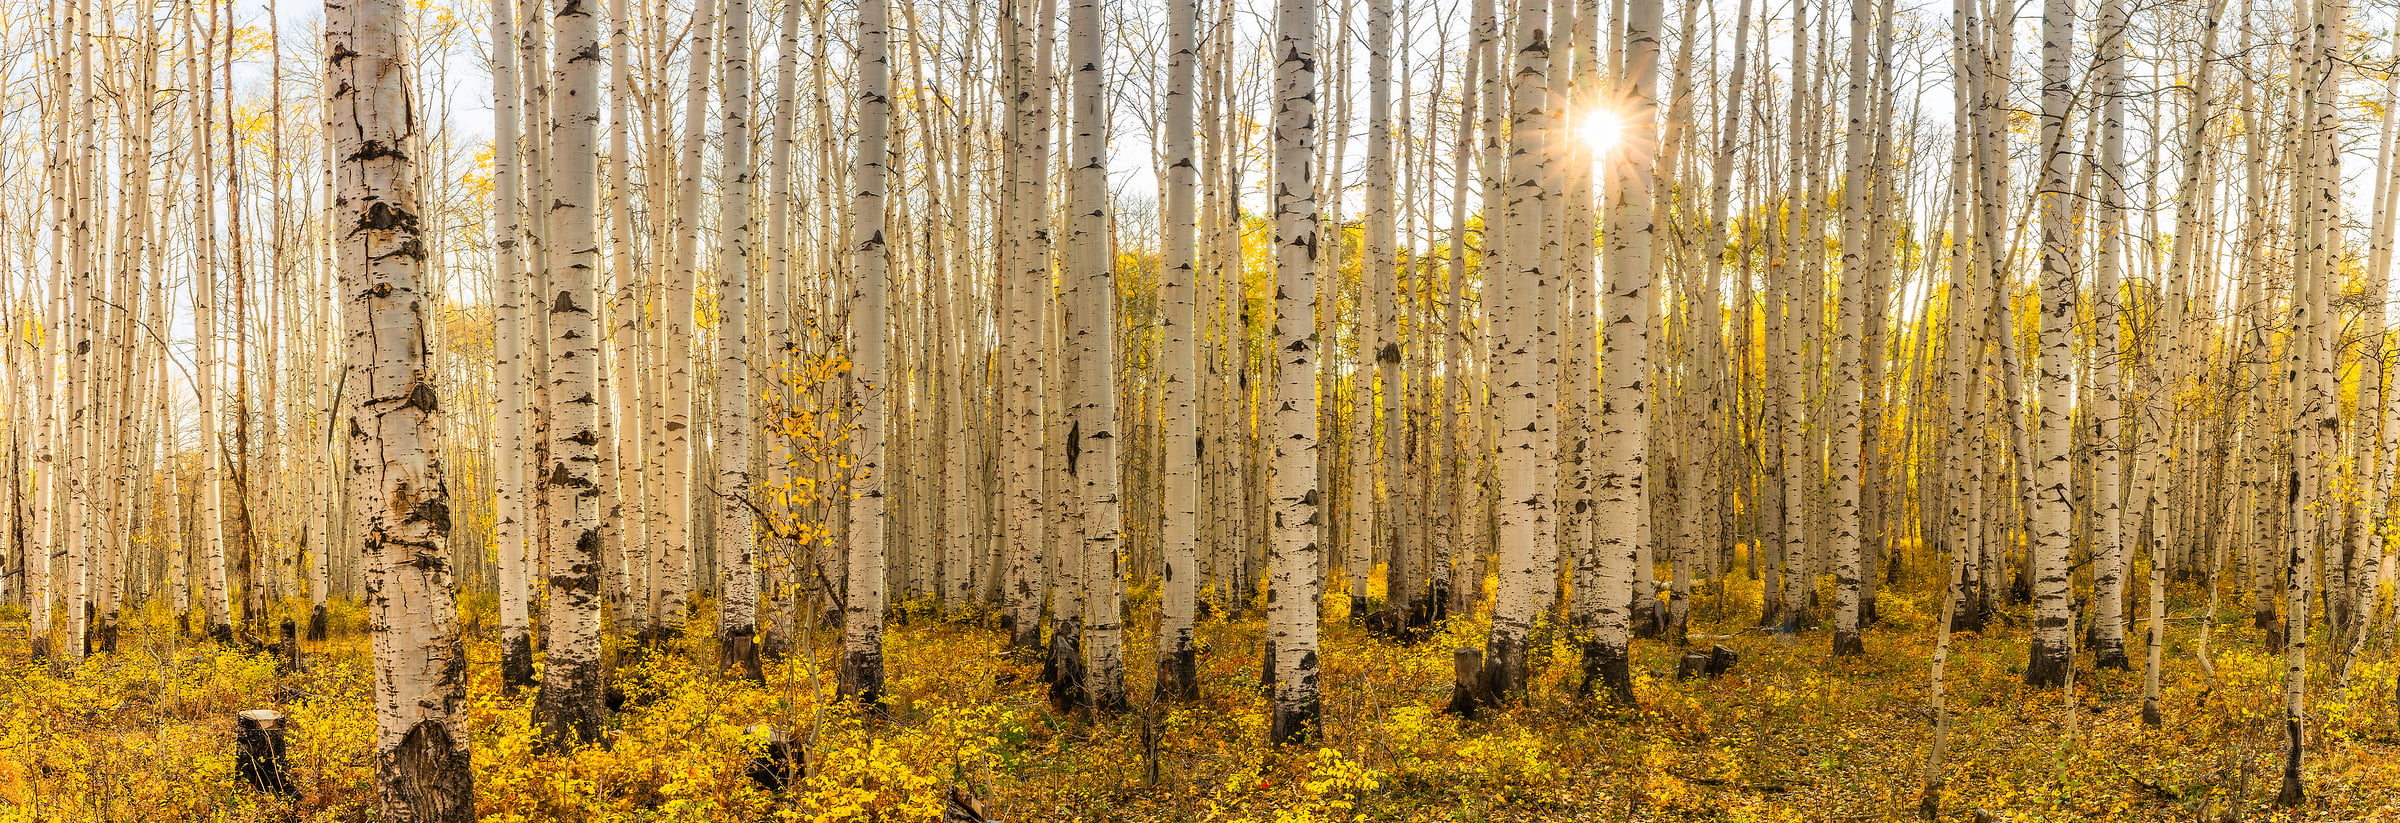 109 megapixels! A very high resolution, large-format VAST photo print of aspen trees in autumn with the sun; nature photograph created by Phillip Noll in Mancos, Colorado